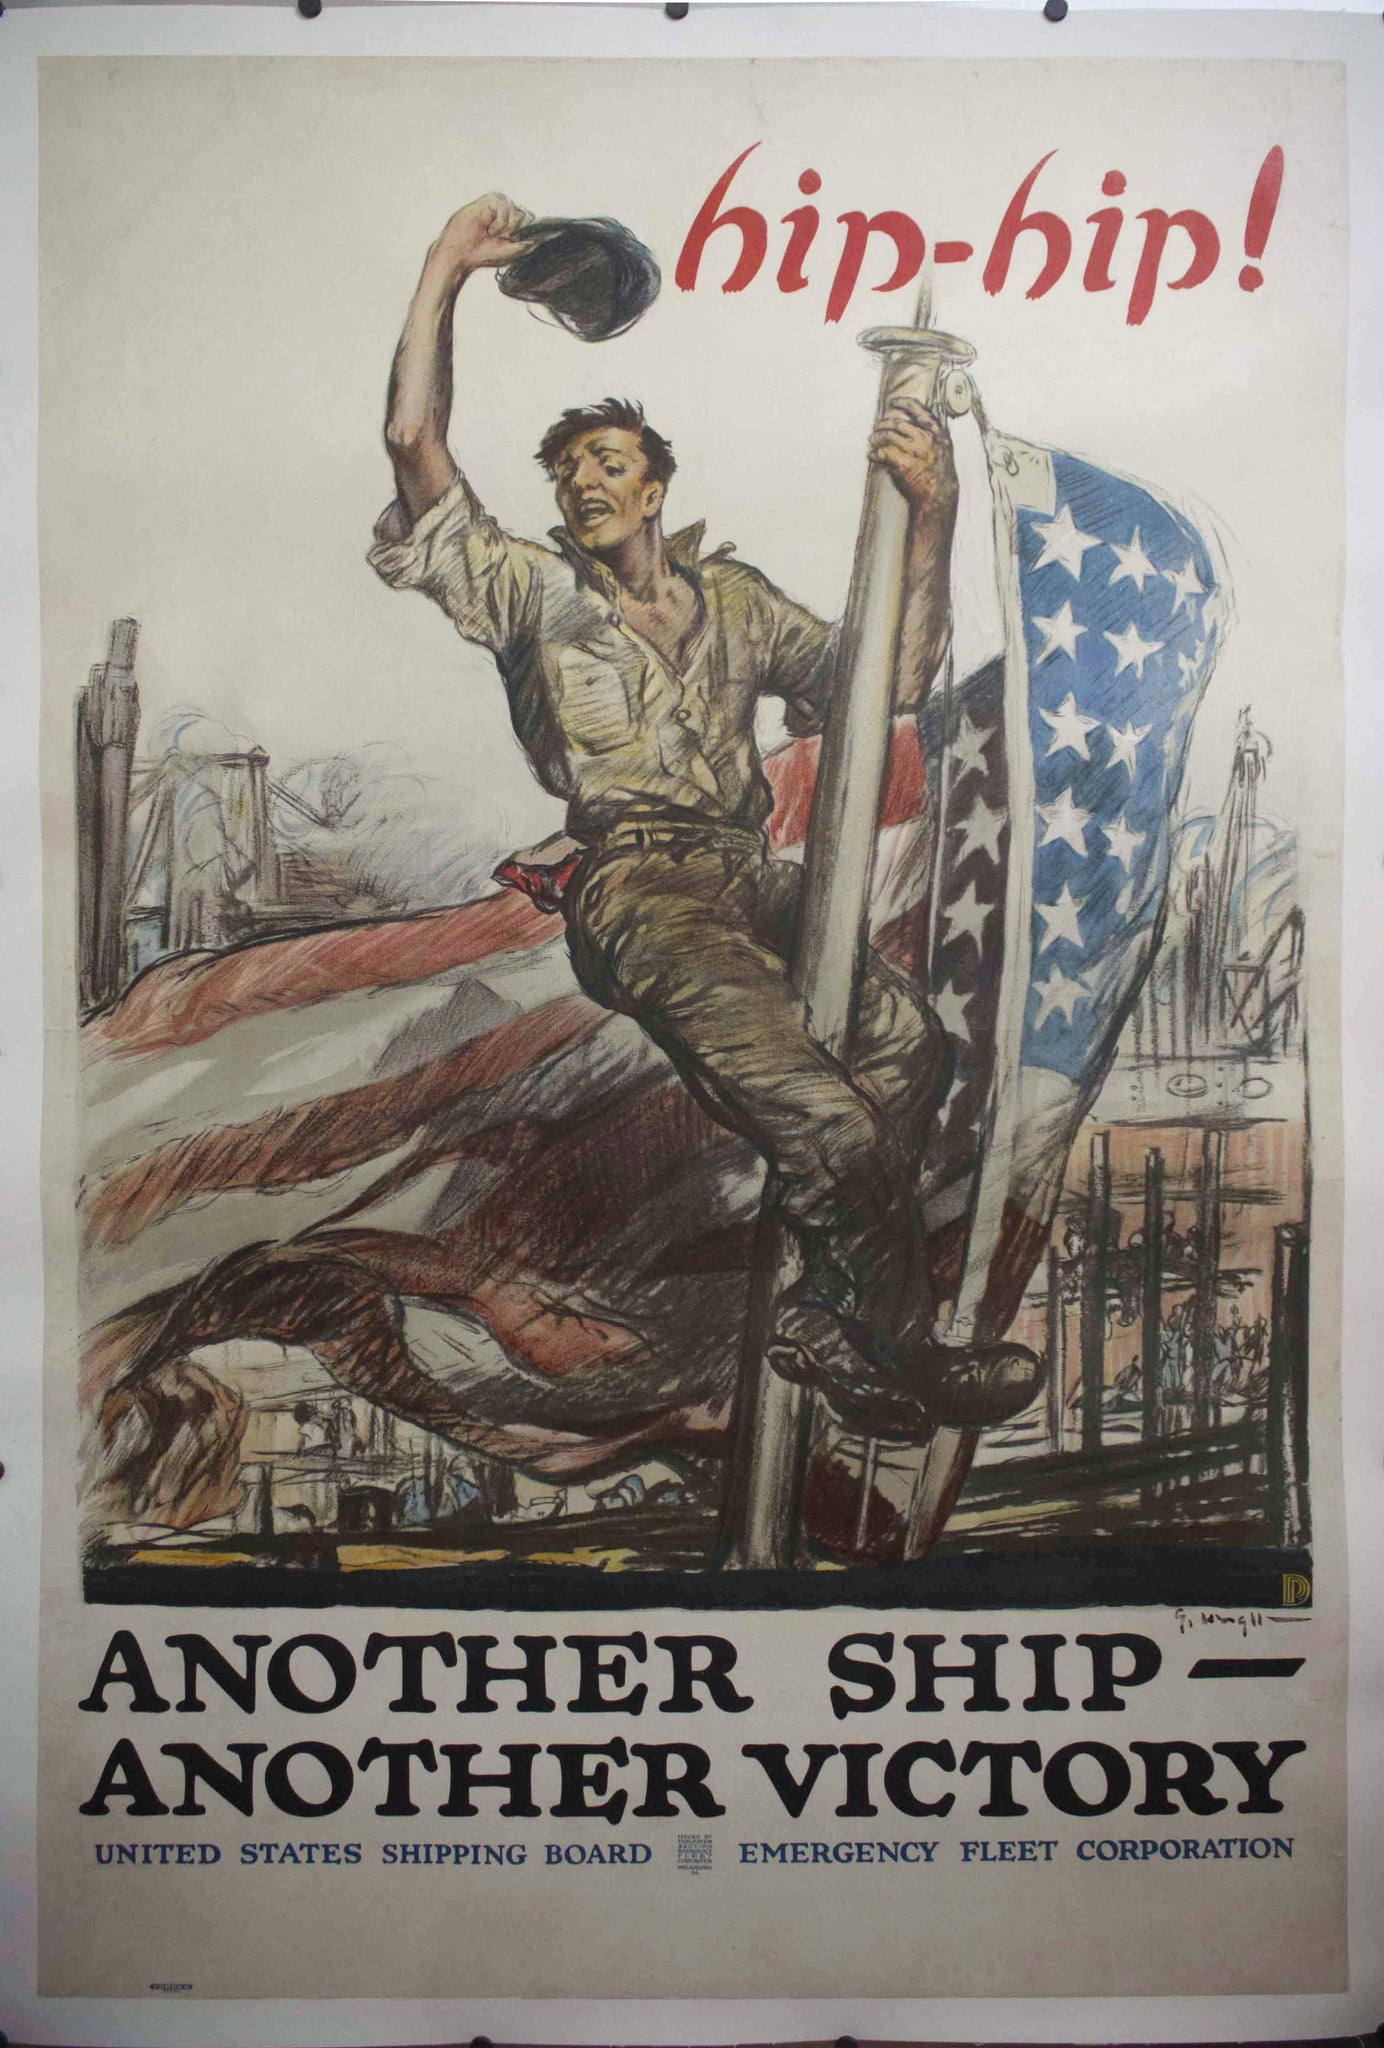 1918 hip-hip! Another Ship - Another Victory | United States Shipping Board - Golden Age Posters